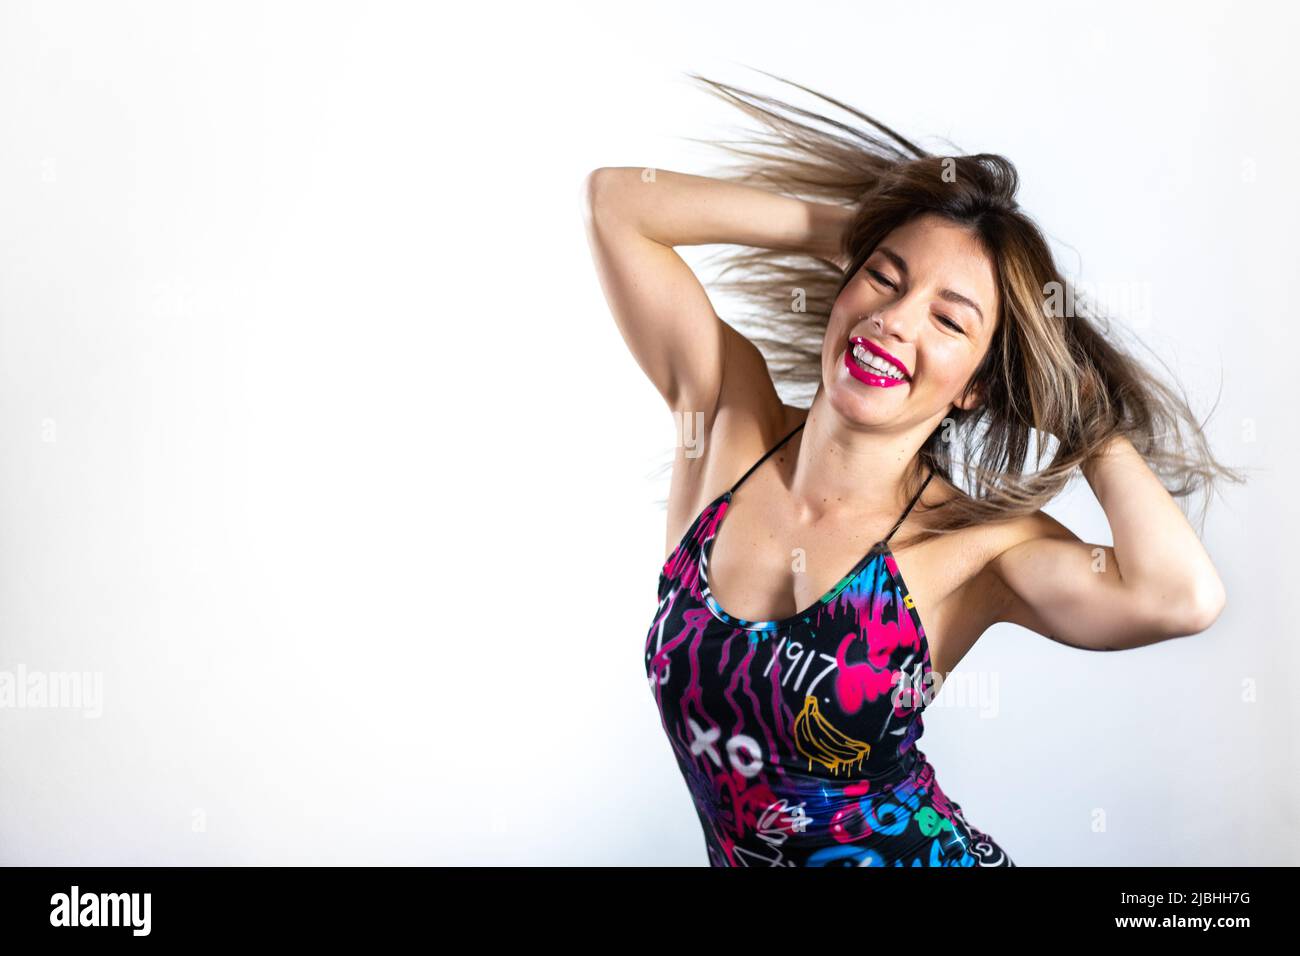 Smiling woman instructor performing a dance movement Stock Photo